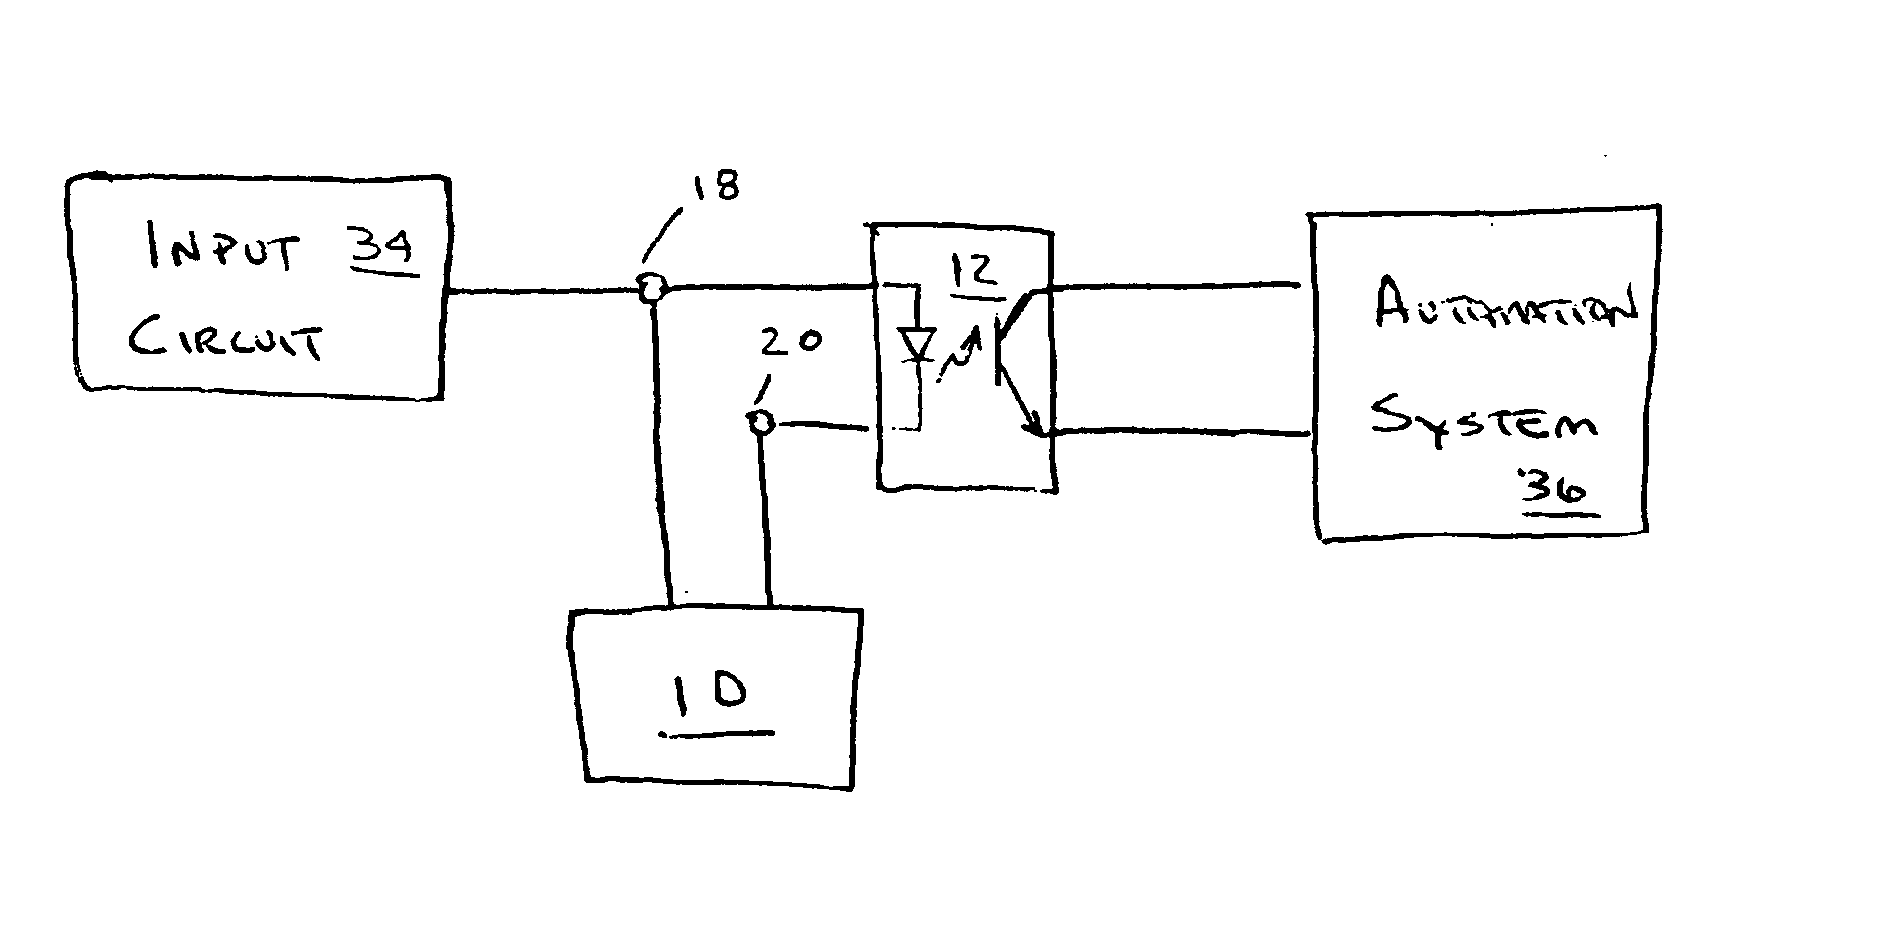 Dual current-source digital-input circuit for an industrial automation system